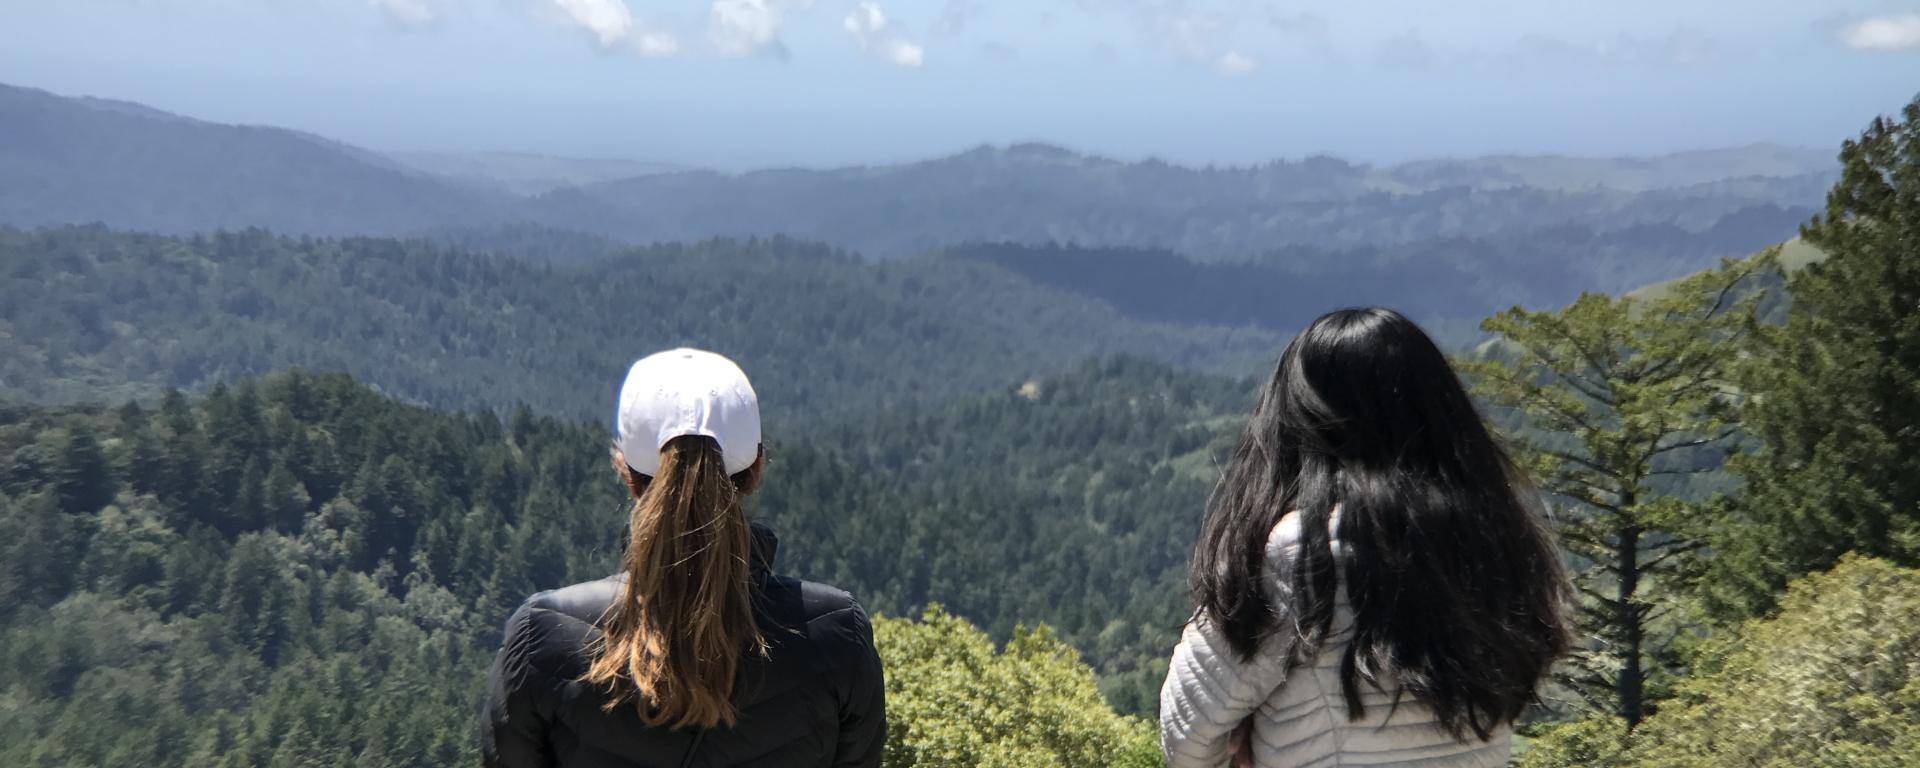 Two women stand on a hilltop looking out over a forested landscape